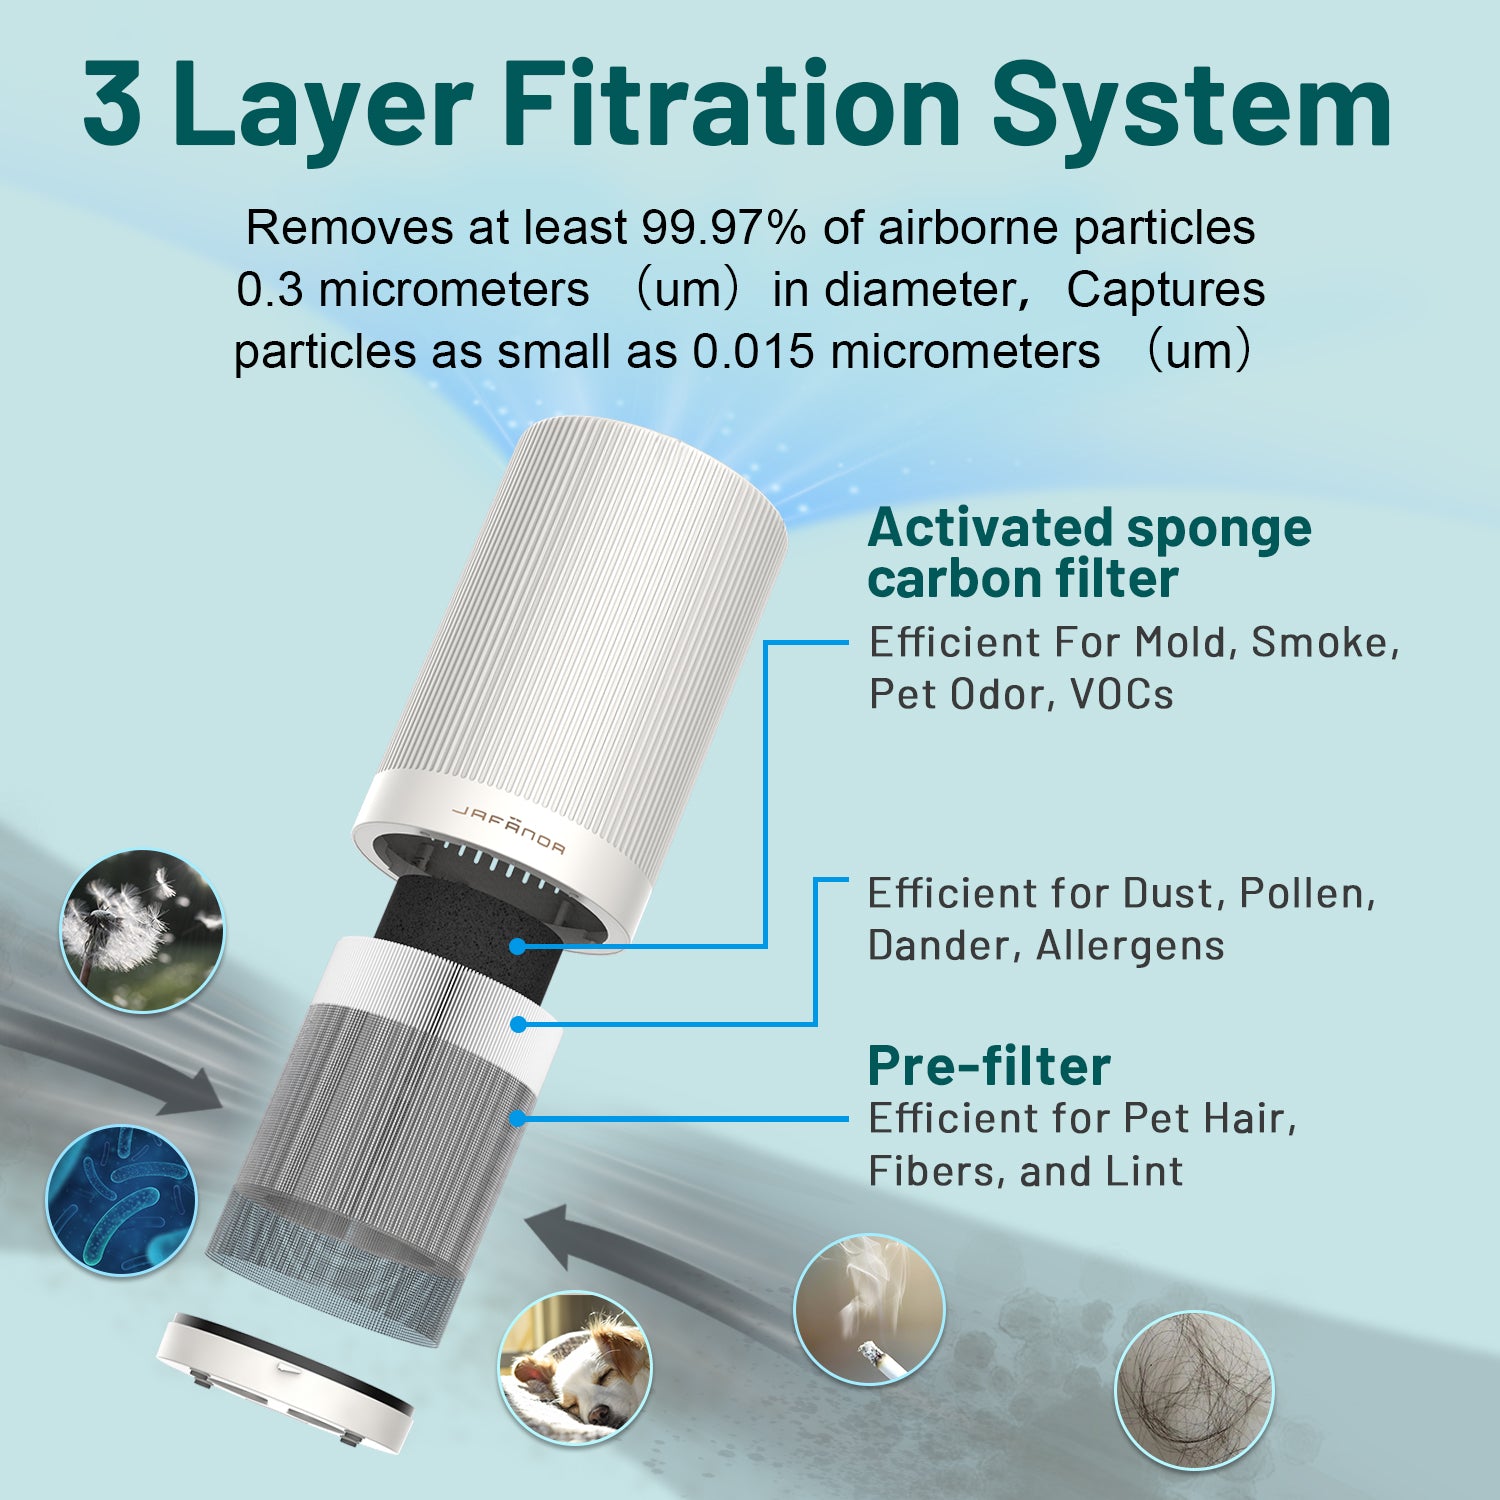 Jafanda Air Purifier Replacement Filter for JF100, 3-in-1 True HEPA & Activated Carbon Filter for Allergies, Smoke, Dust, Odors. Removes 99.97% of Airborne Pollutants - Jafanda